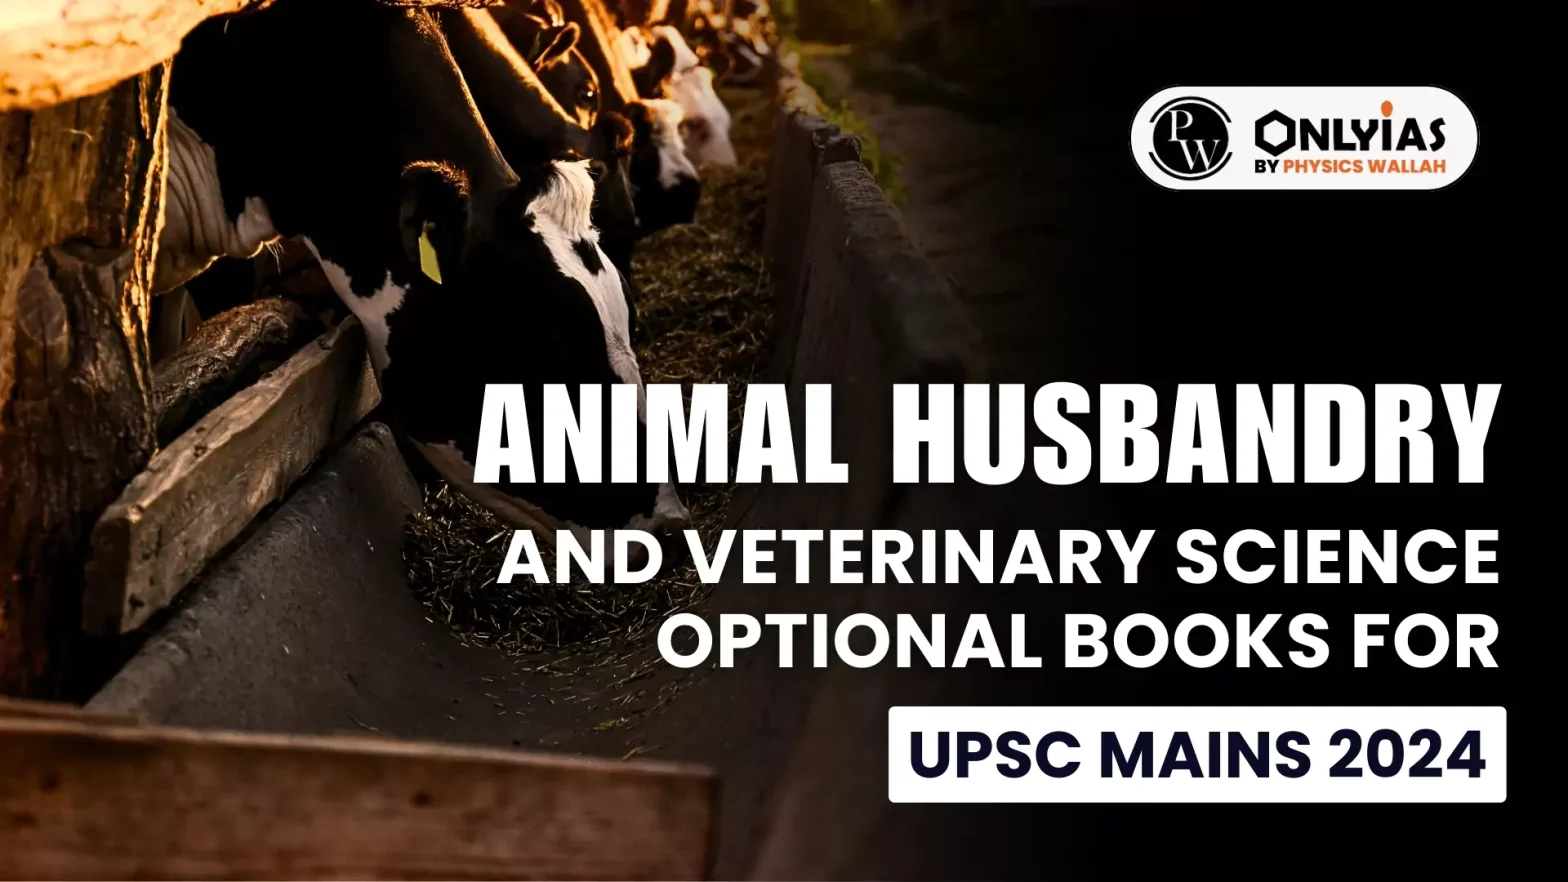 Animal Husbandry and Veterinary Science Optional Books for UPSC Mains 2024